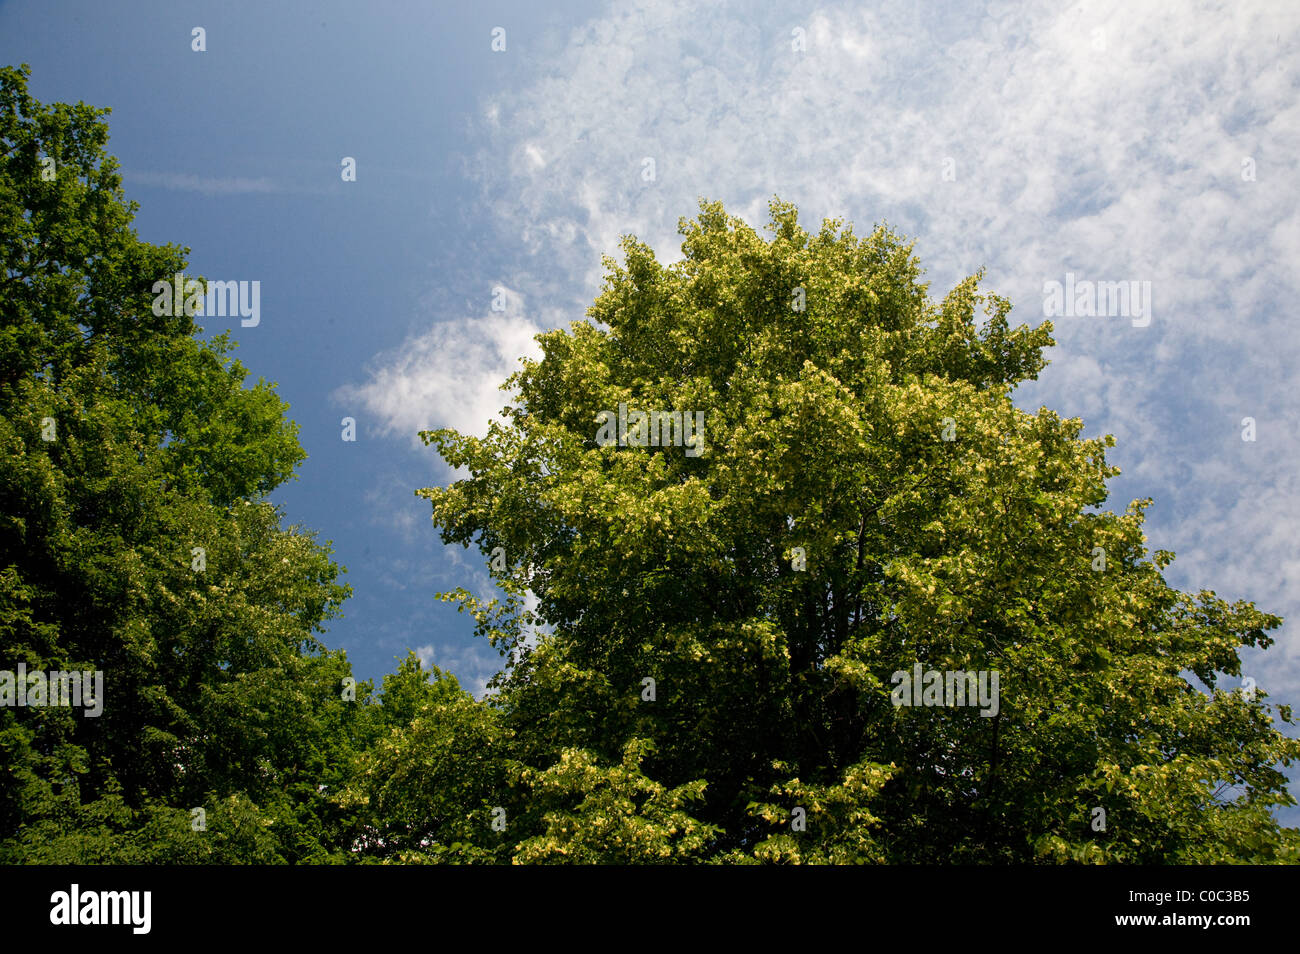 Flowering Linden tree against forest and blue sky Stock Photo